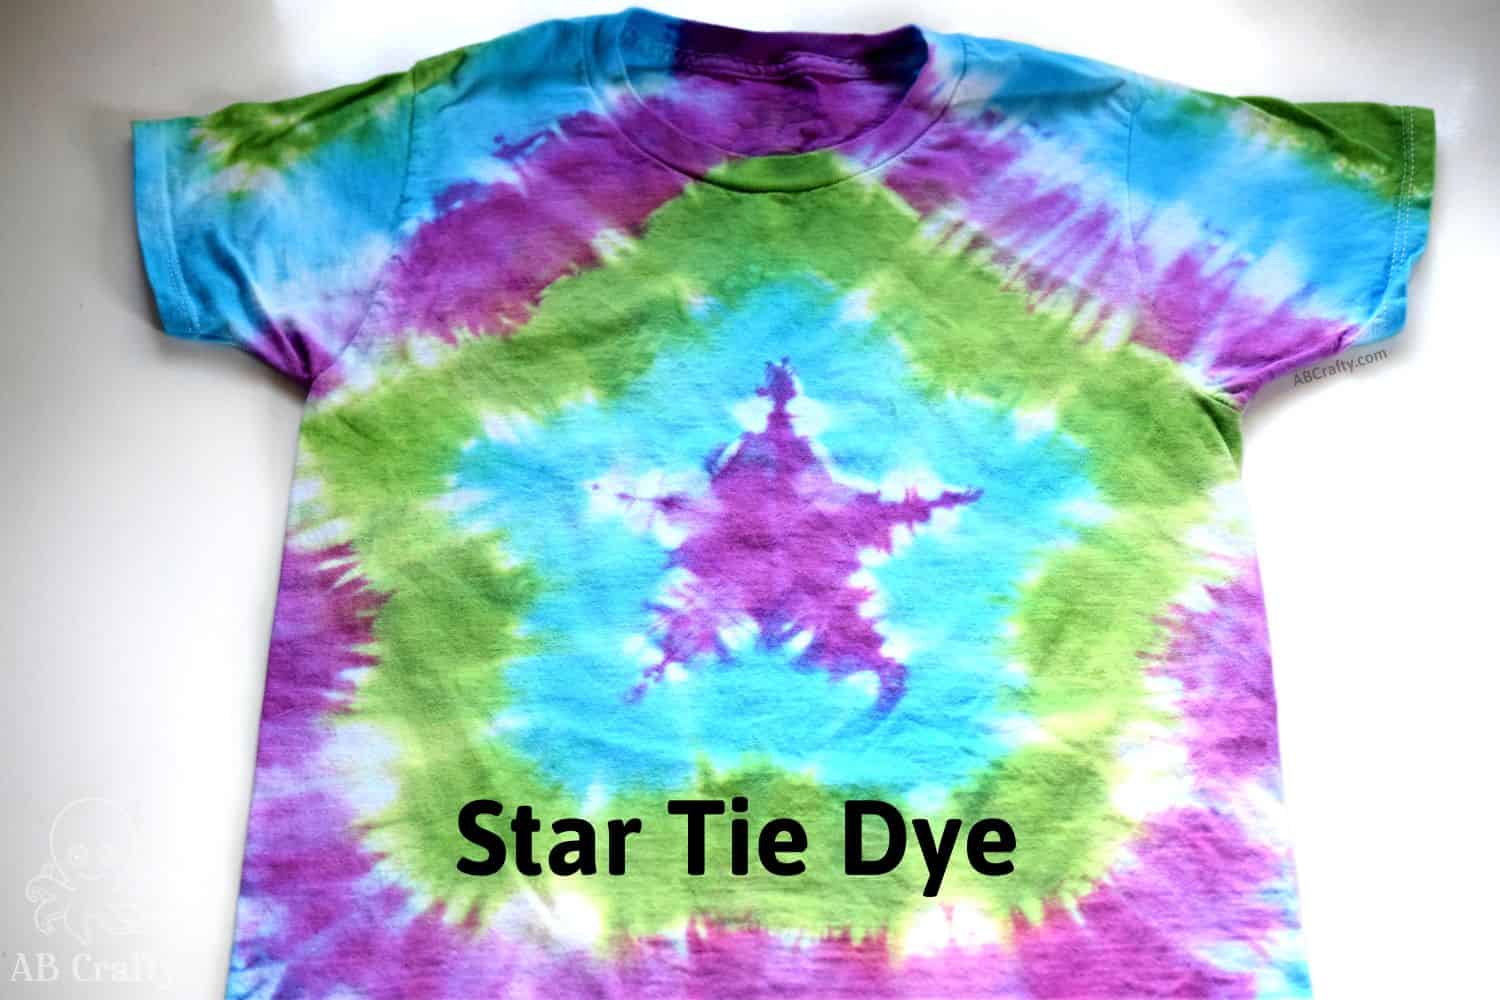 finished shirt with a tie dye star design in purple, blue, and green with the title "star tie dye"